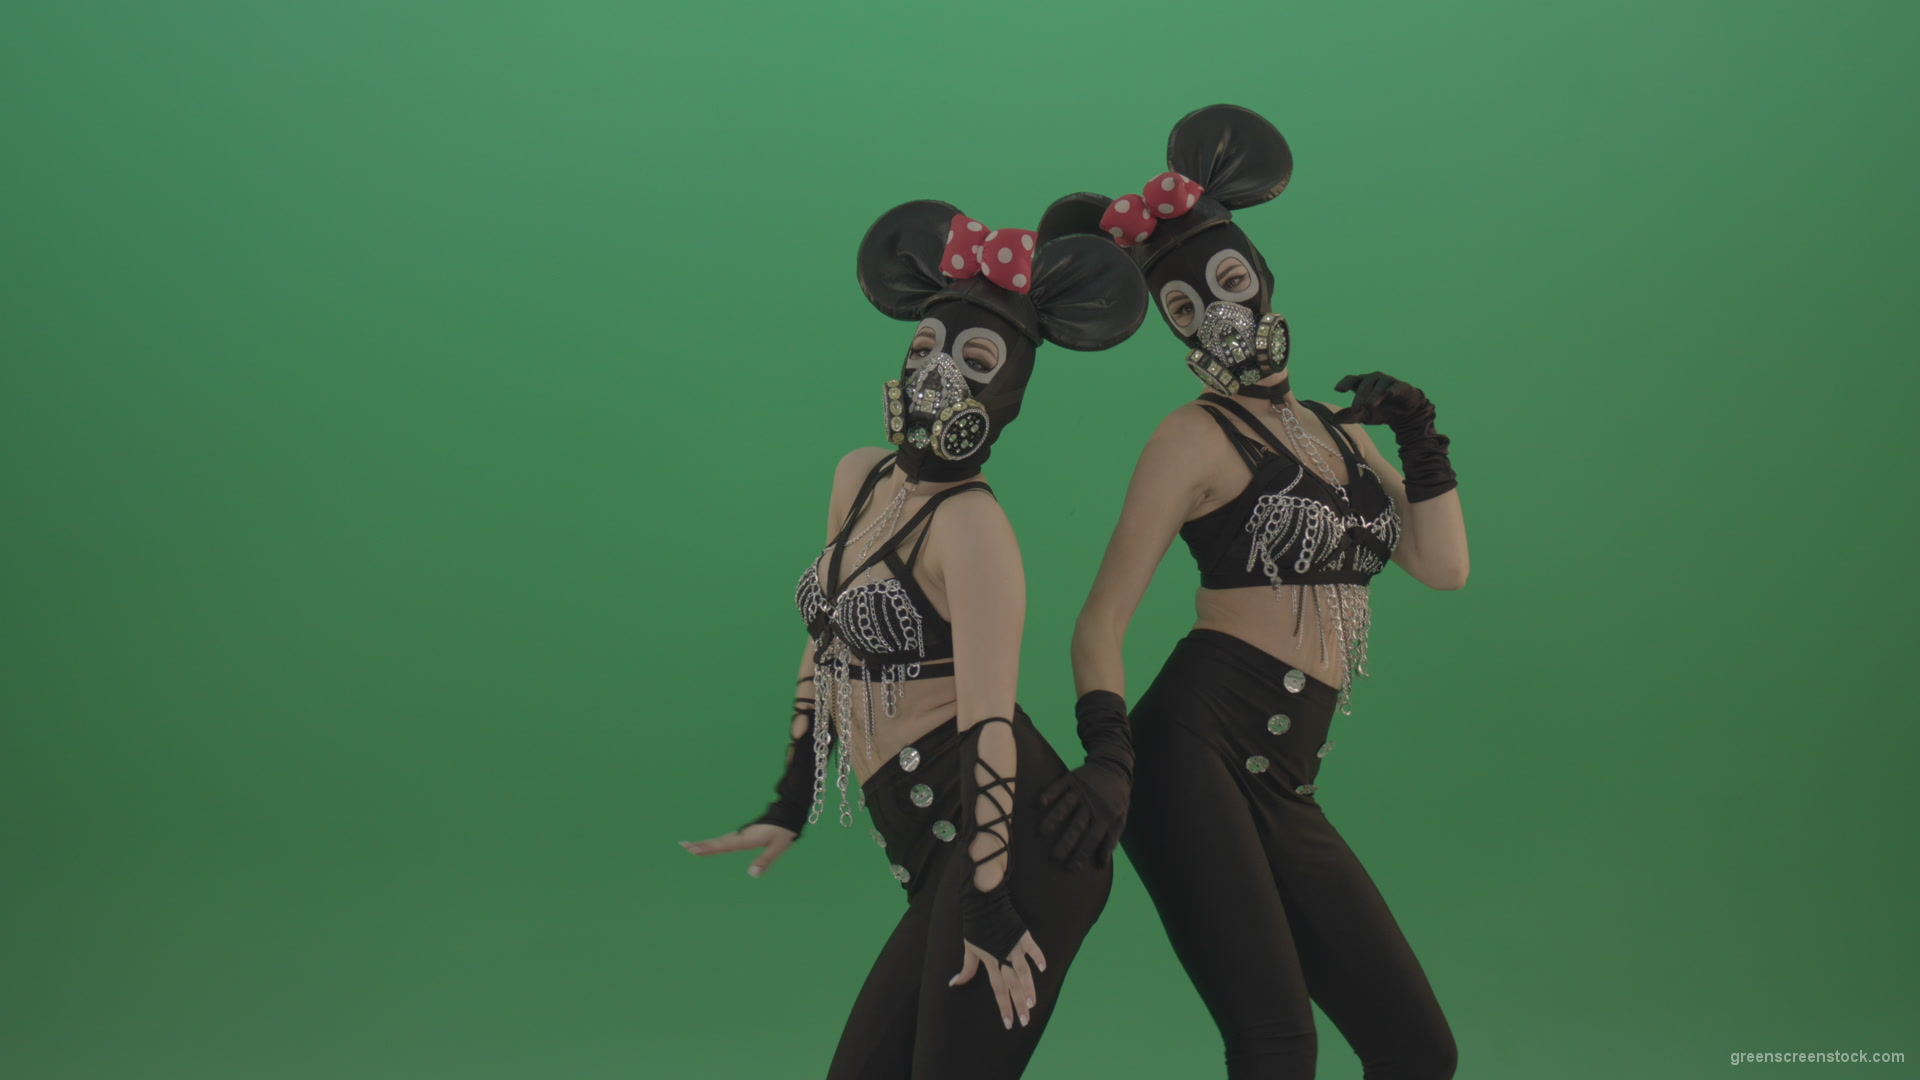 Girls-dressed-Mickey-Mouse-dance-well-on-green-screen_005 Green Screen Stock